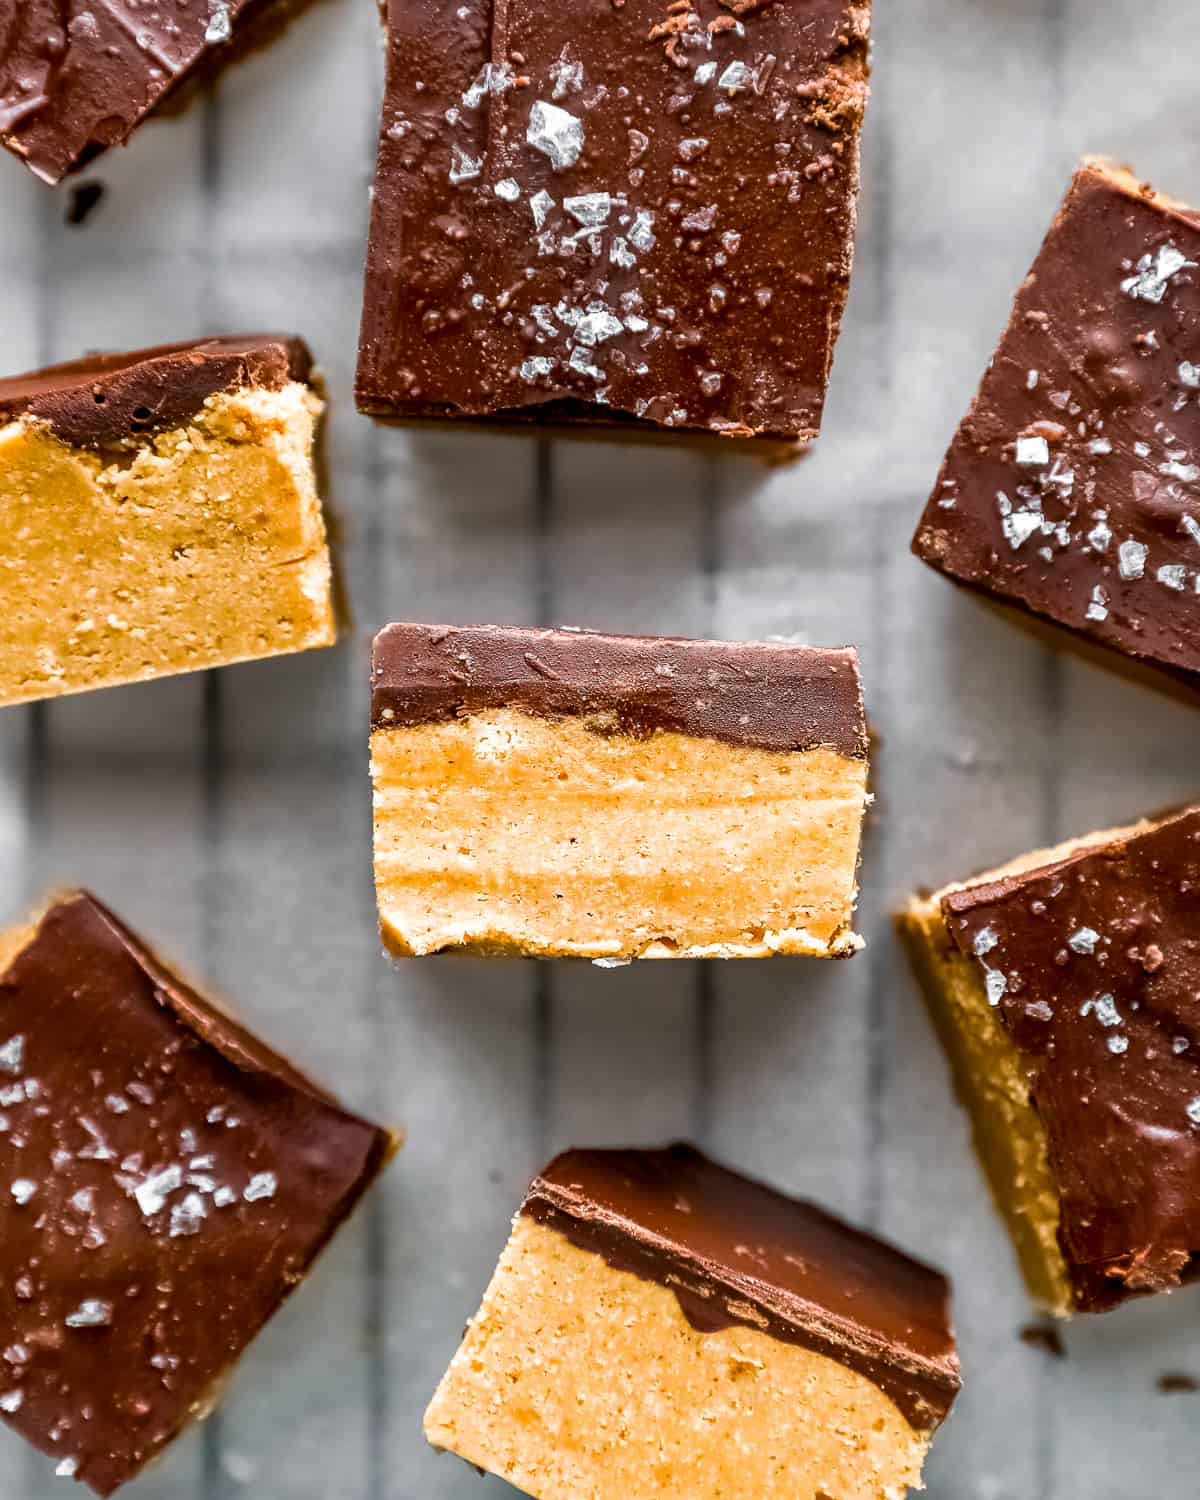 bars viewed from the side to show the thick layer of peanut butter.